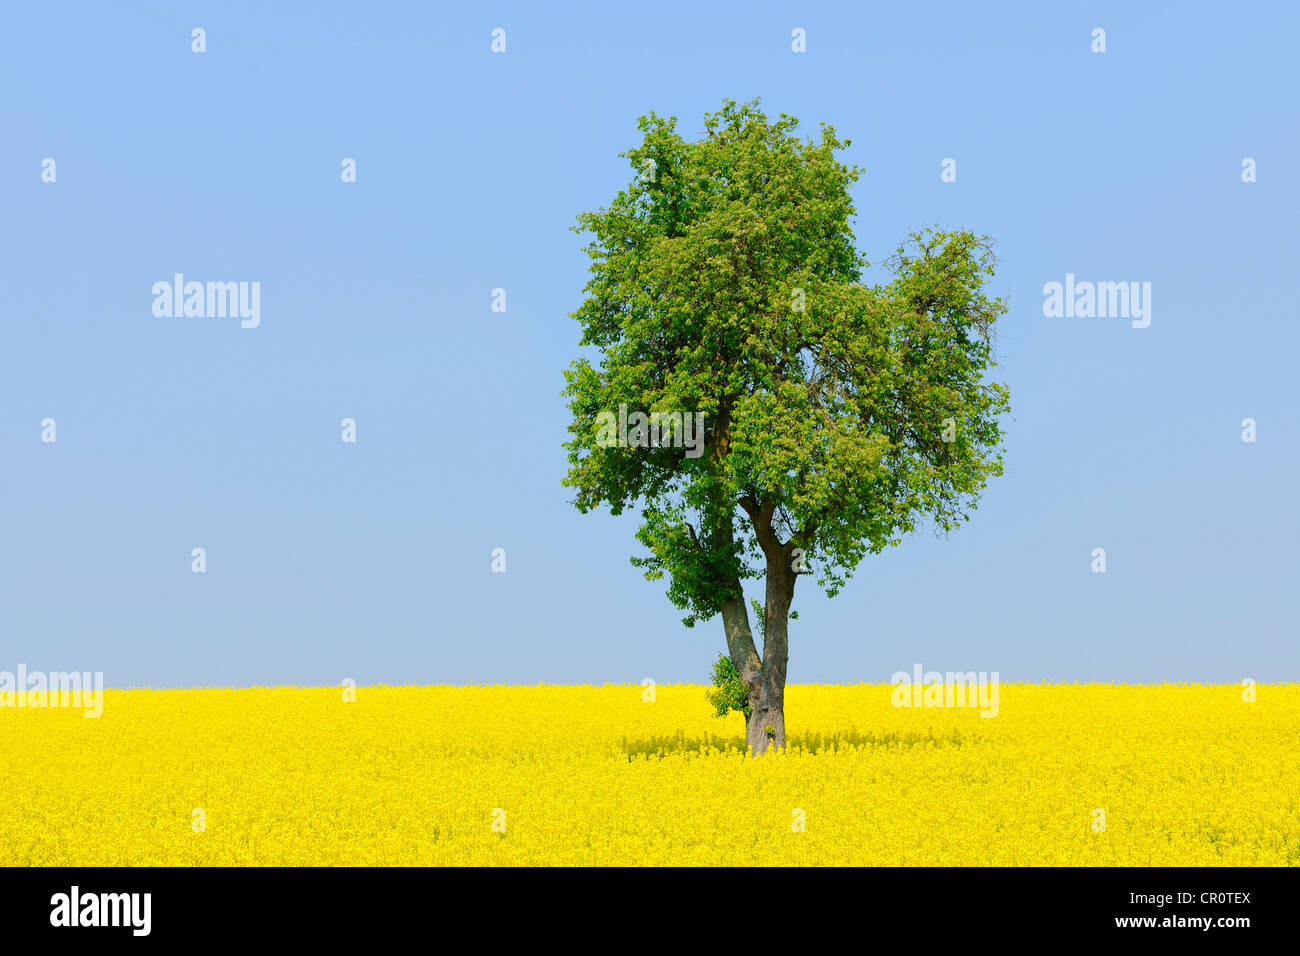 Pear tree (Pyrus) in a canola field, Lower Franconia, Bavaria, Germany, Europe Stock Photo